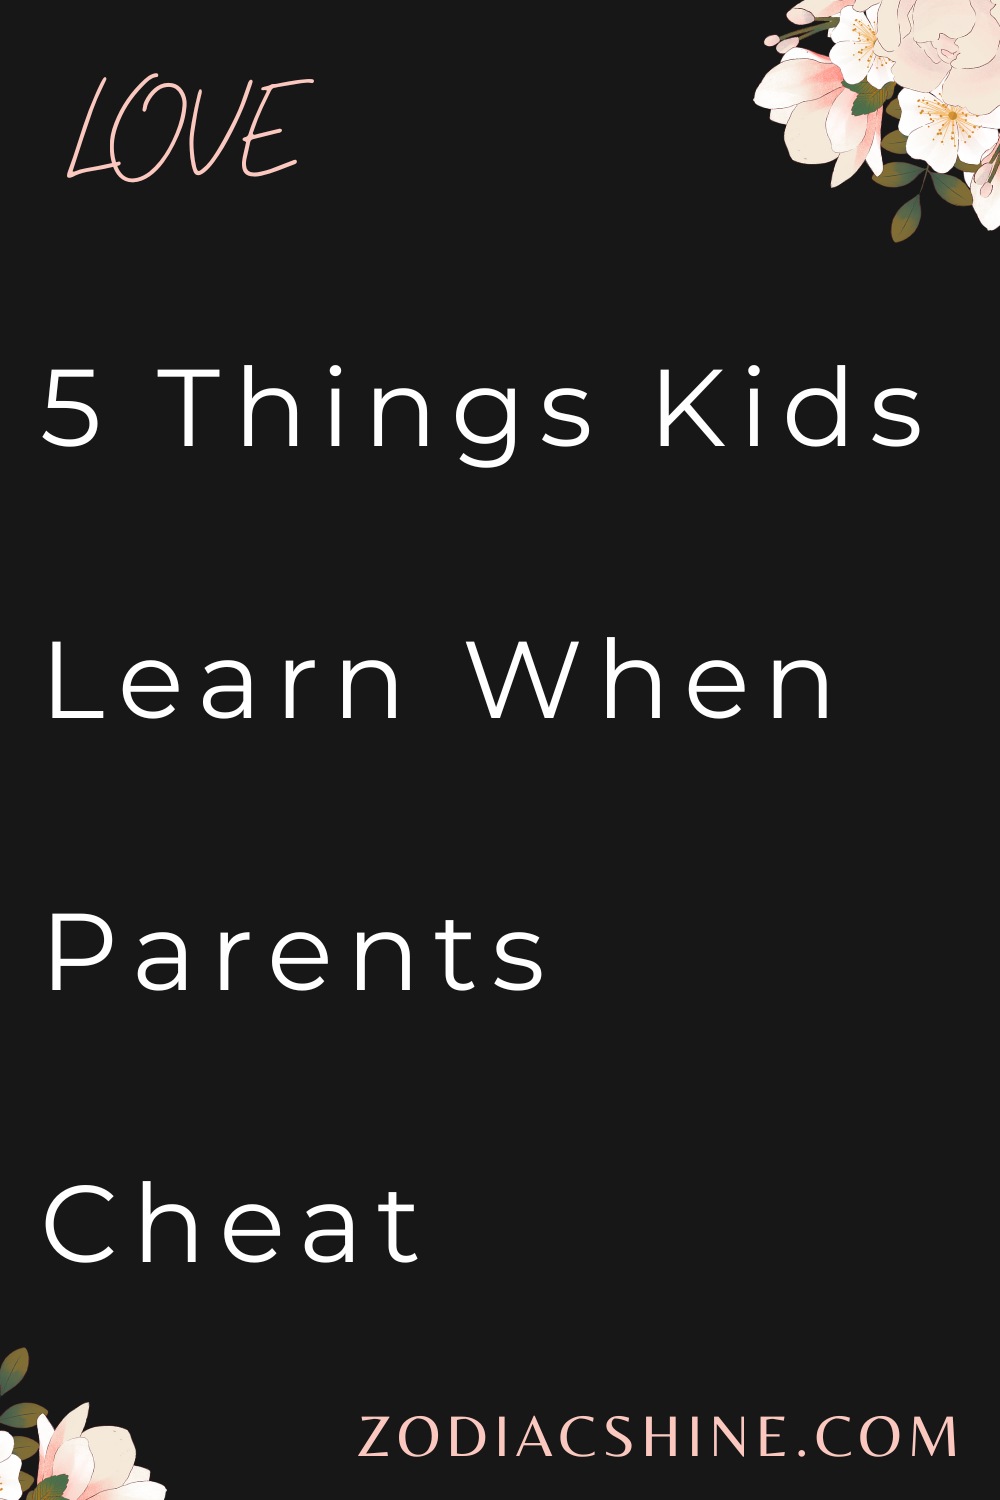 5 Things Kids Learn When Parents Cheat